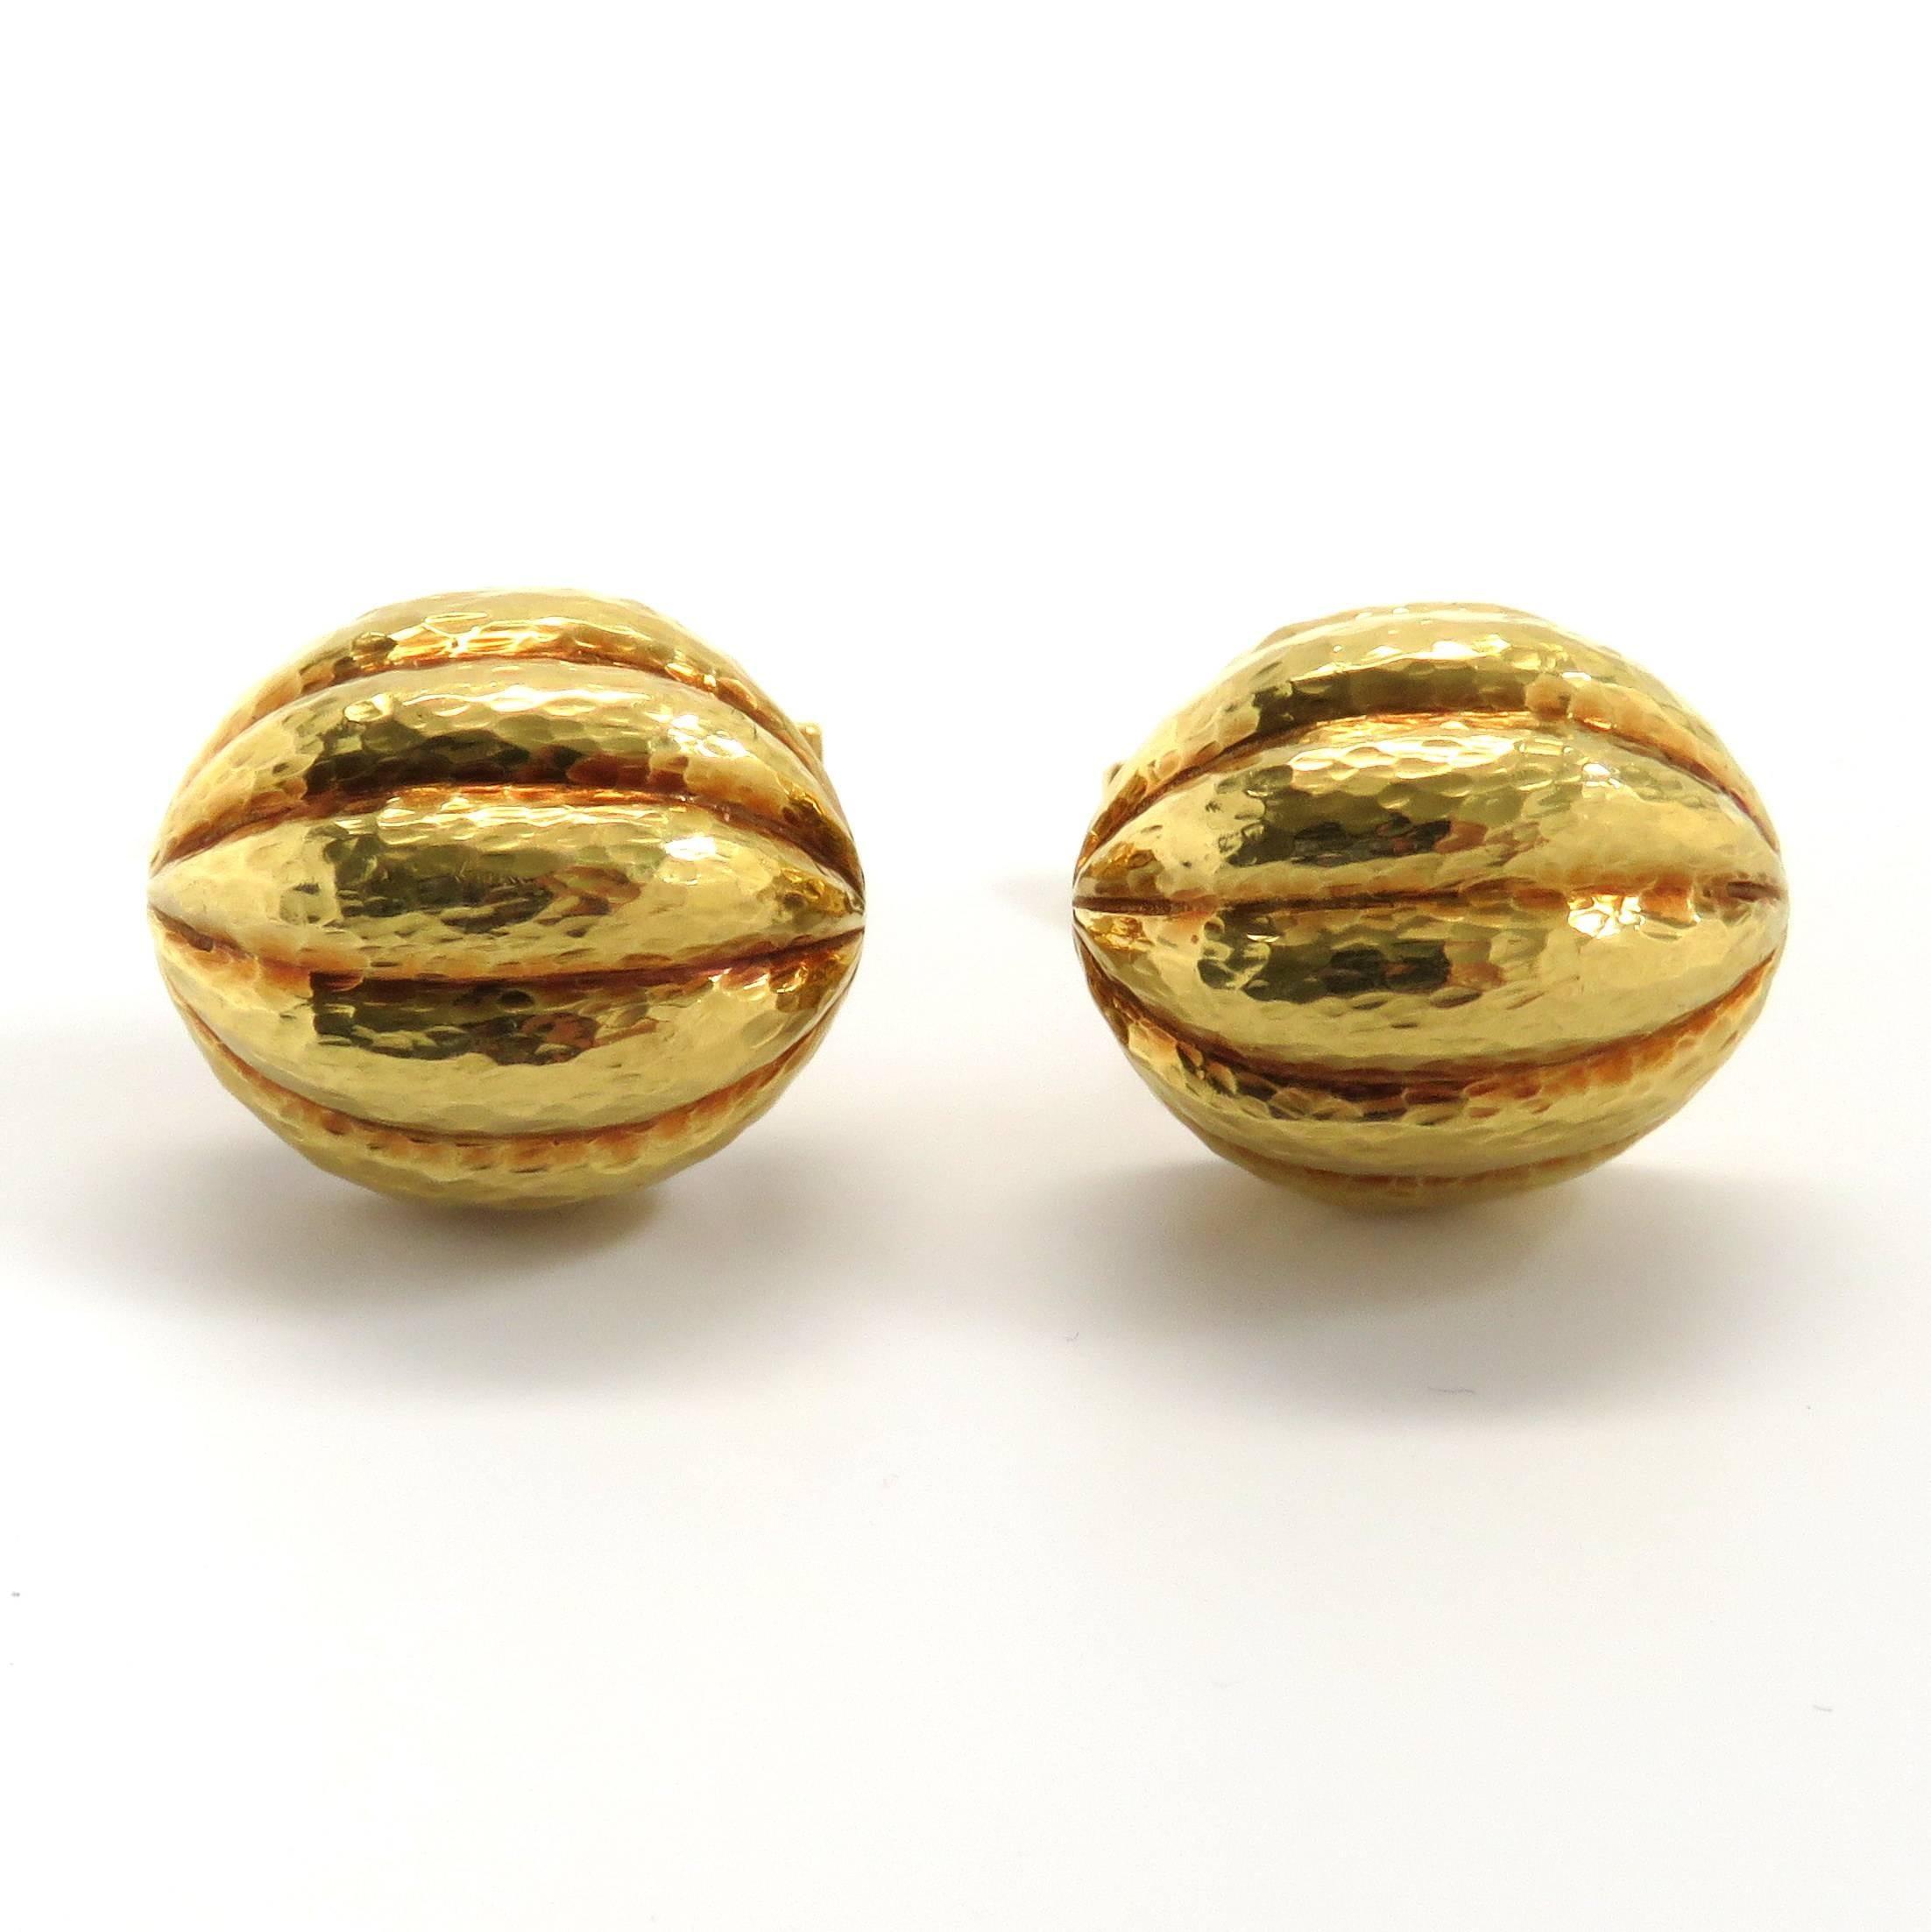 A pair of 18k yellow gold cufflinks by David Webb.  The cufflinks measure 20mm x 17mm and weigh 22.9 grams.  Marked: Webb, 18k